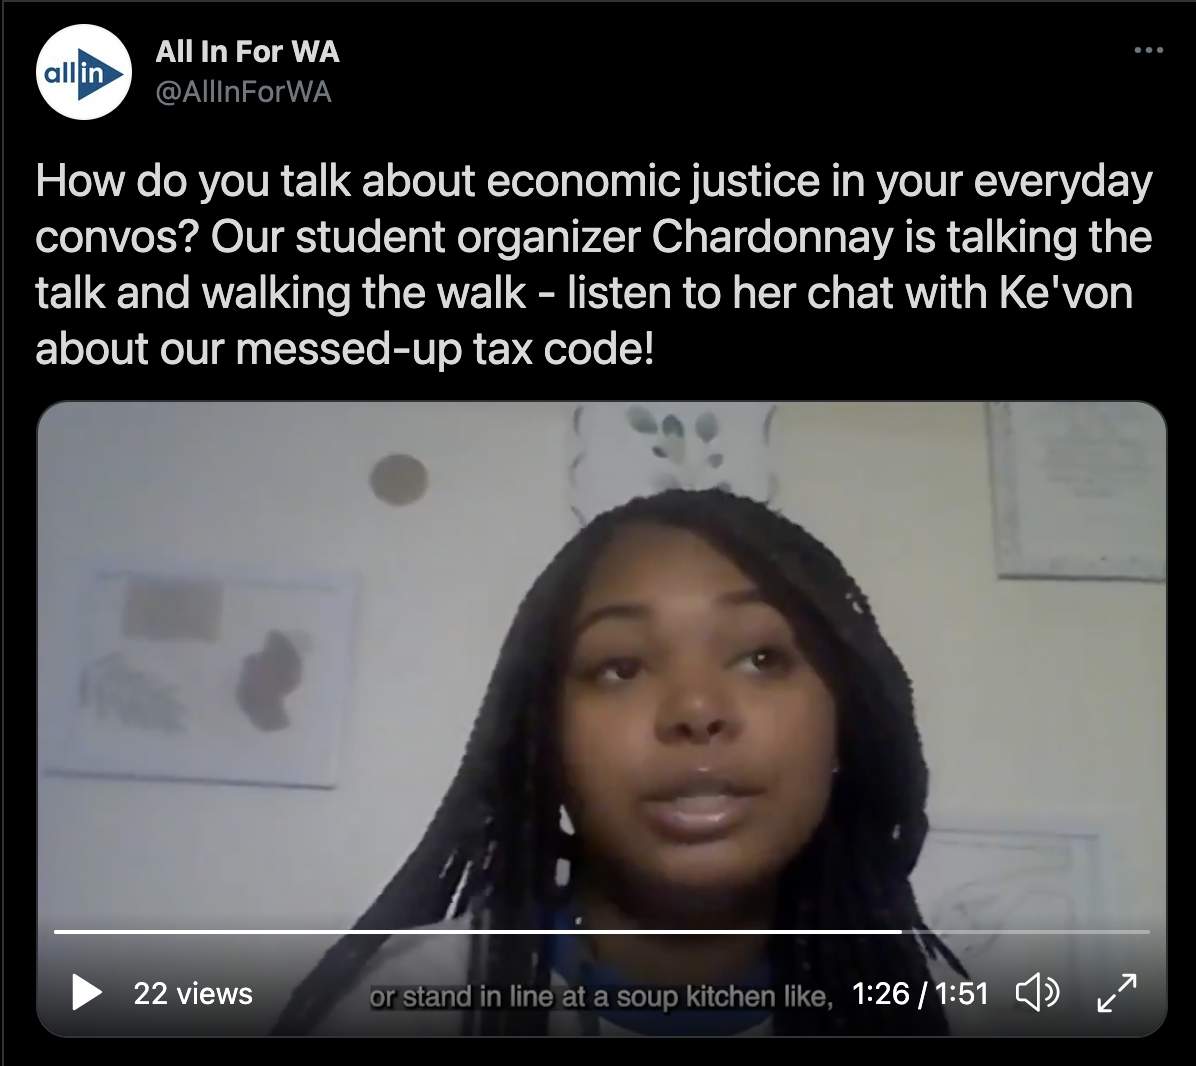 Tweet screenshot that says "How do you talk about economic justice in your everyday convos? Our student organizer Chardonnay is talking the talk and walking the walk - listen to her chat with Ke'von about our messed-up tax code!" Video is attached with young woman with braids, midspeech. 